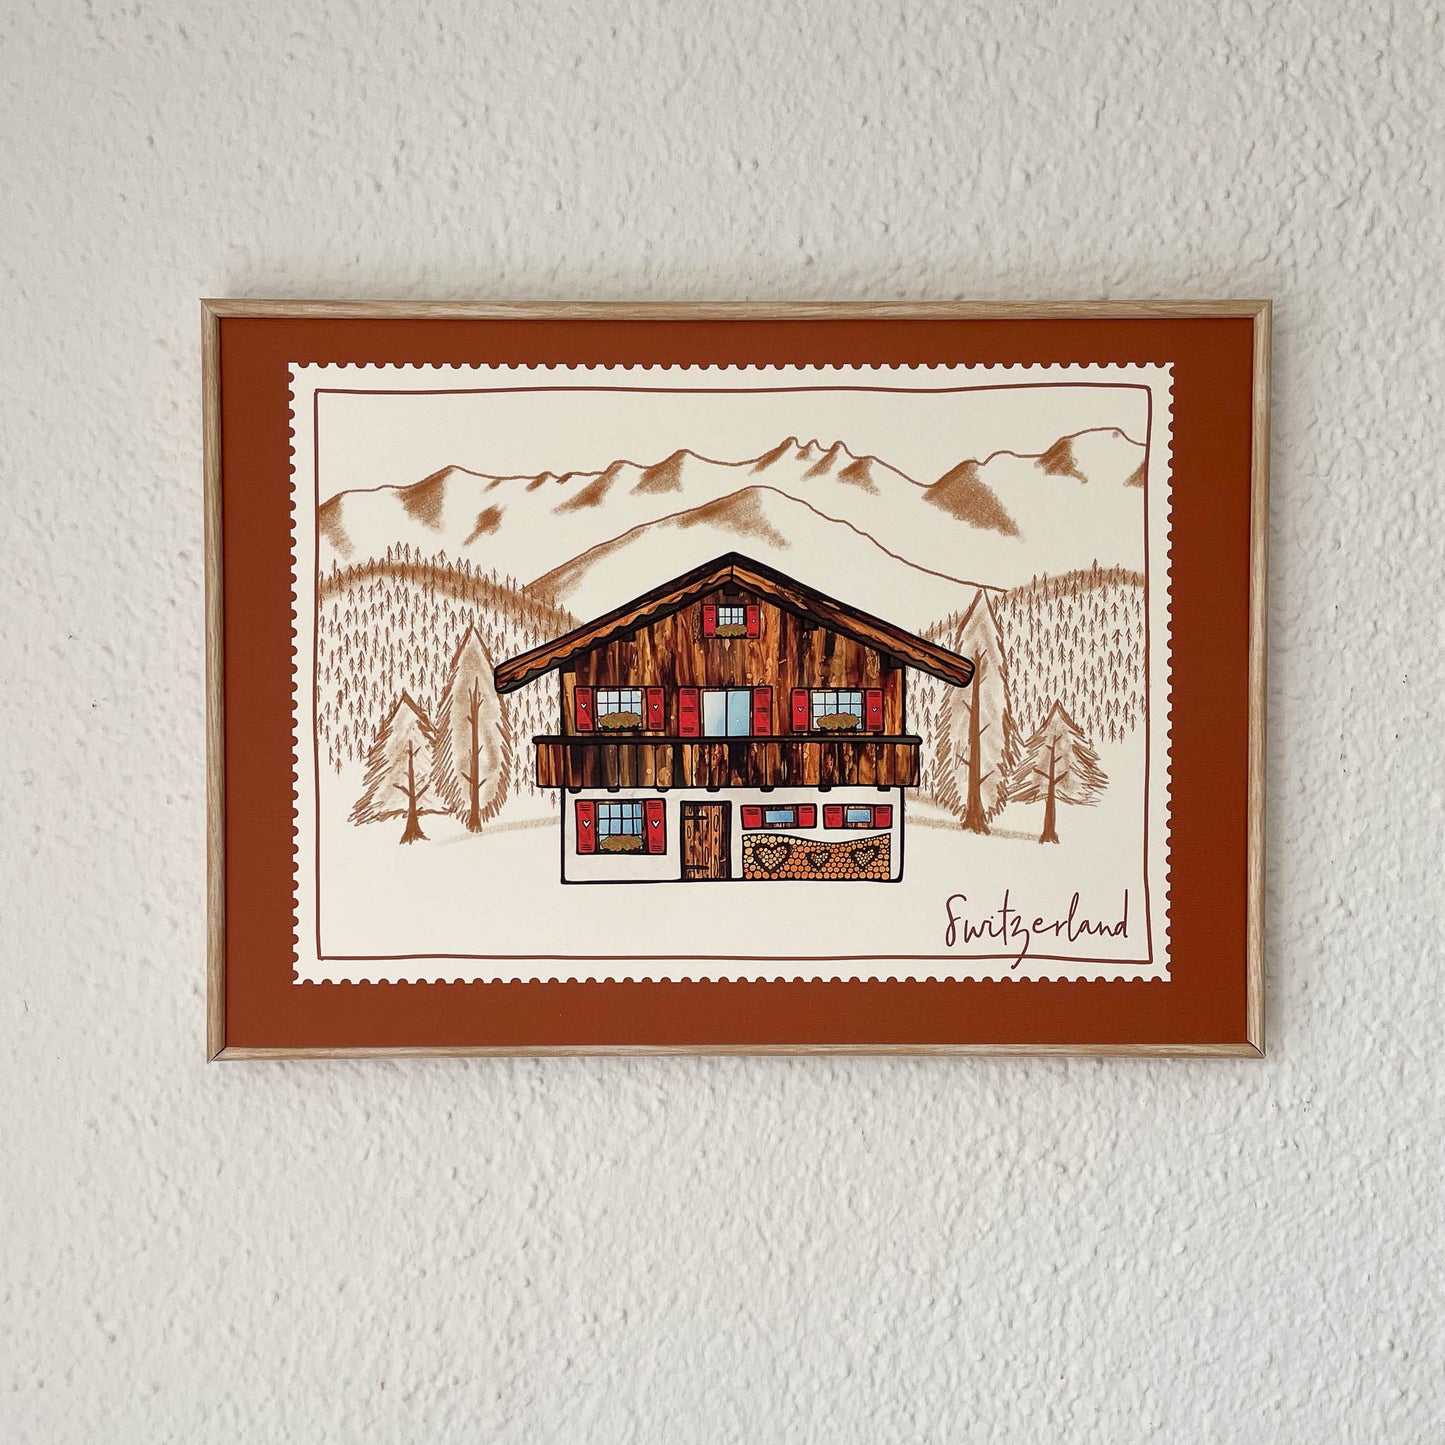 Thoughtful gift idea: Chalet Dreams print showcasing the breathtaking beauty of the Swiss Alps, ideal for Swiss expats missing their homeland.